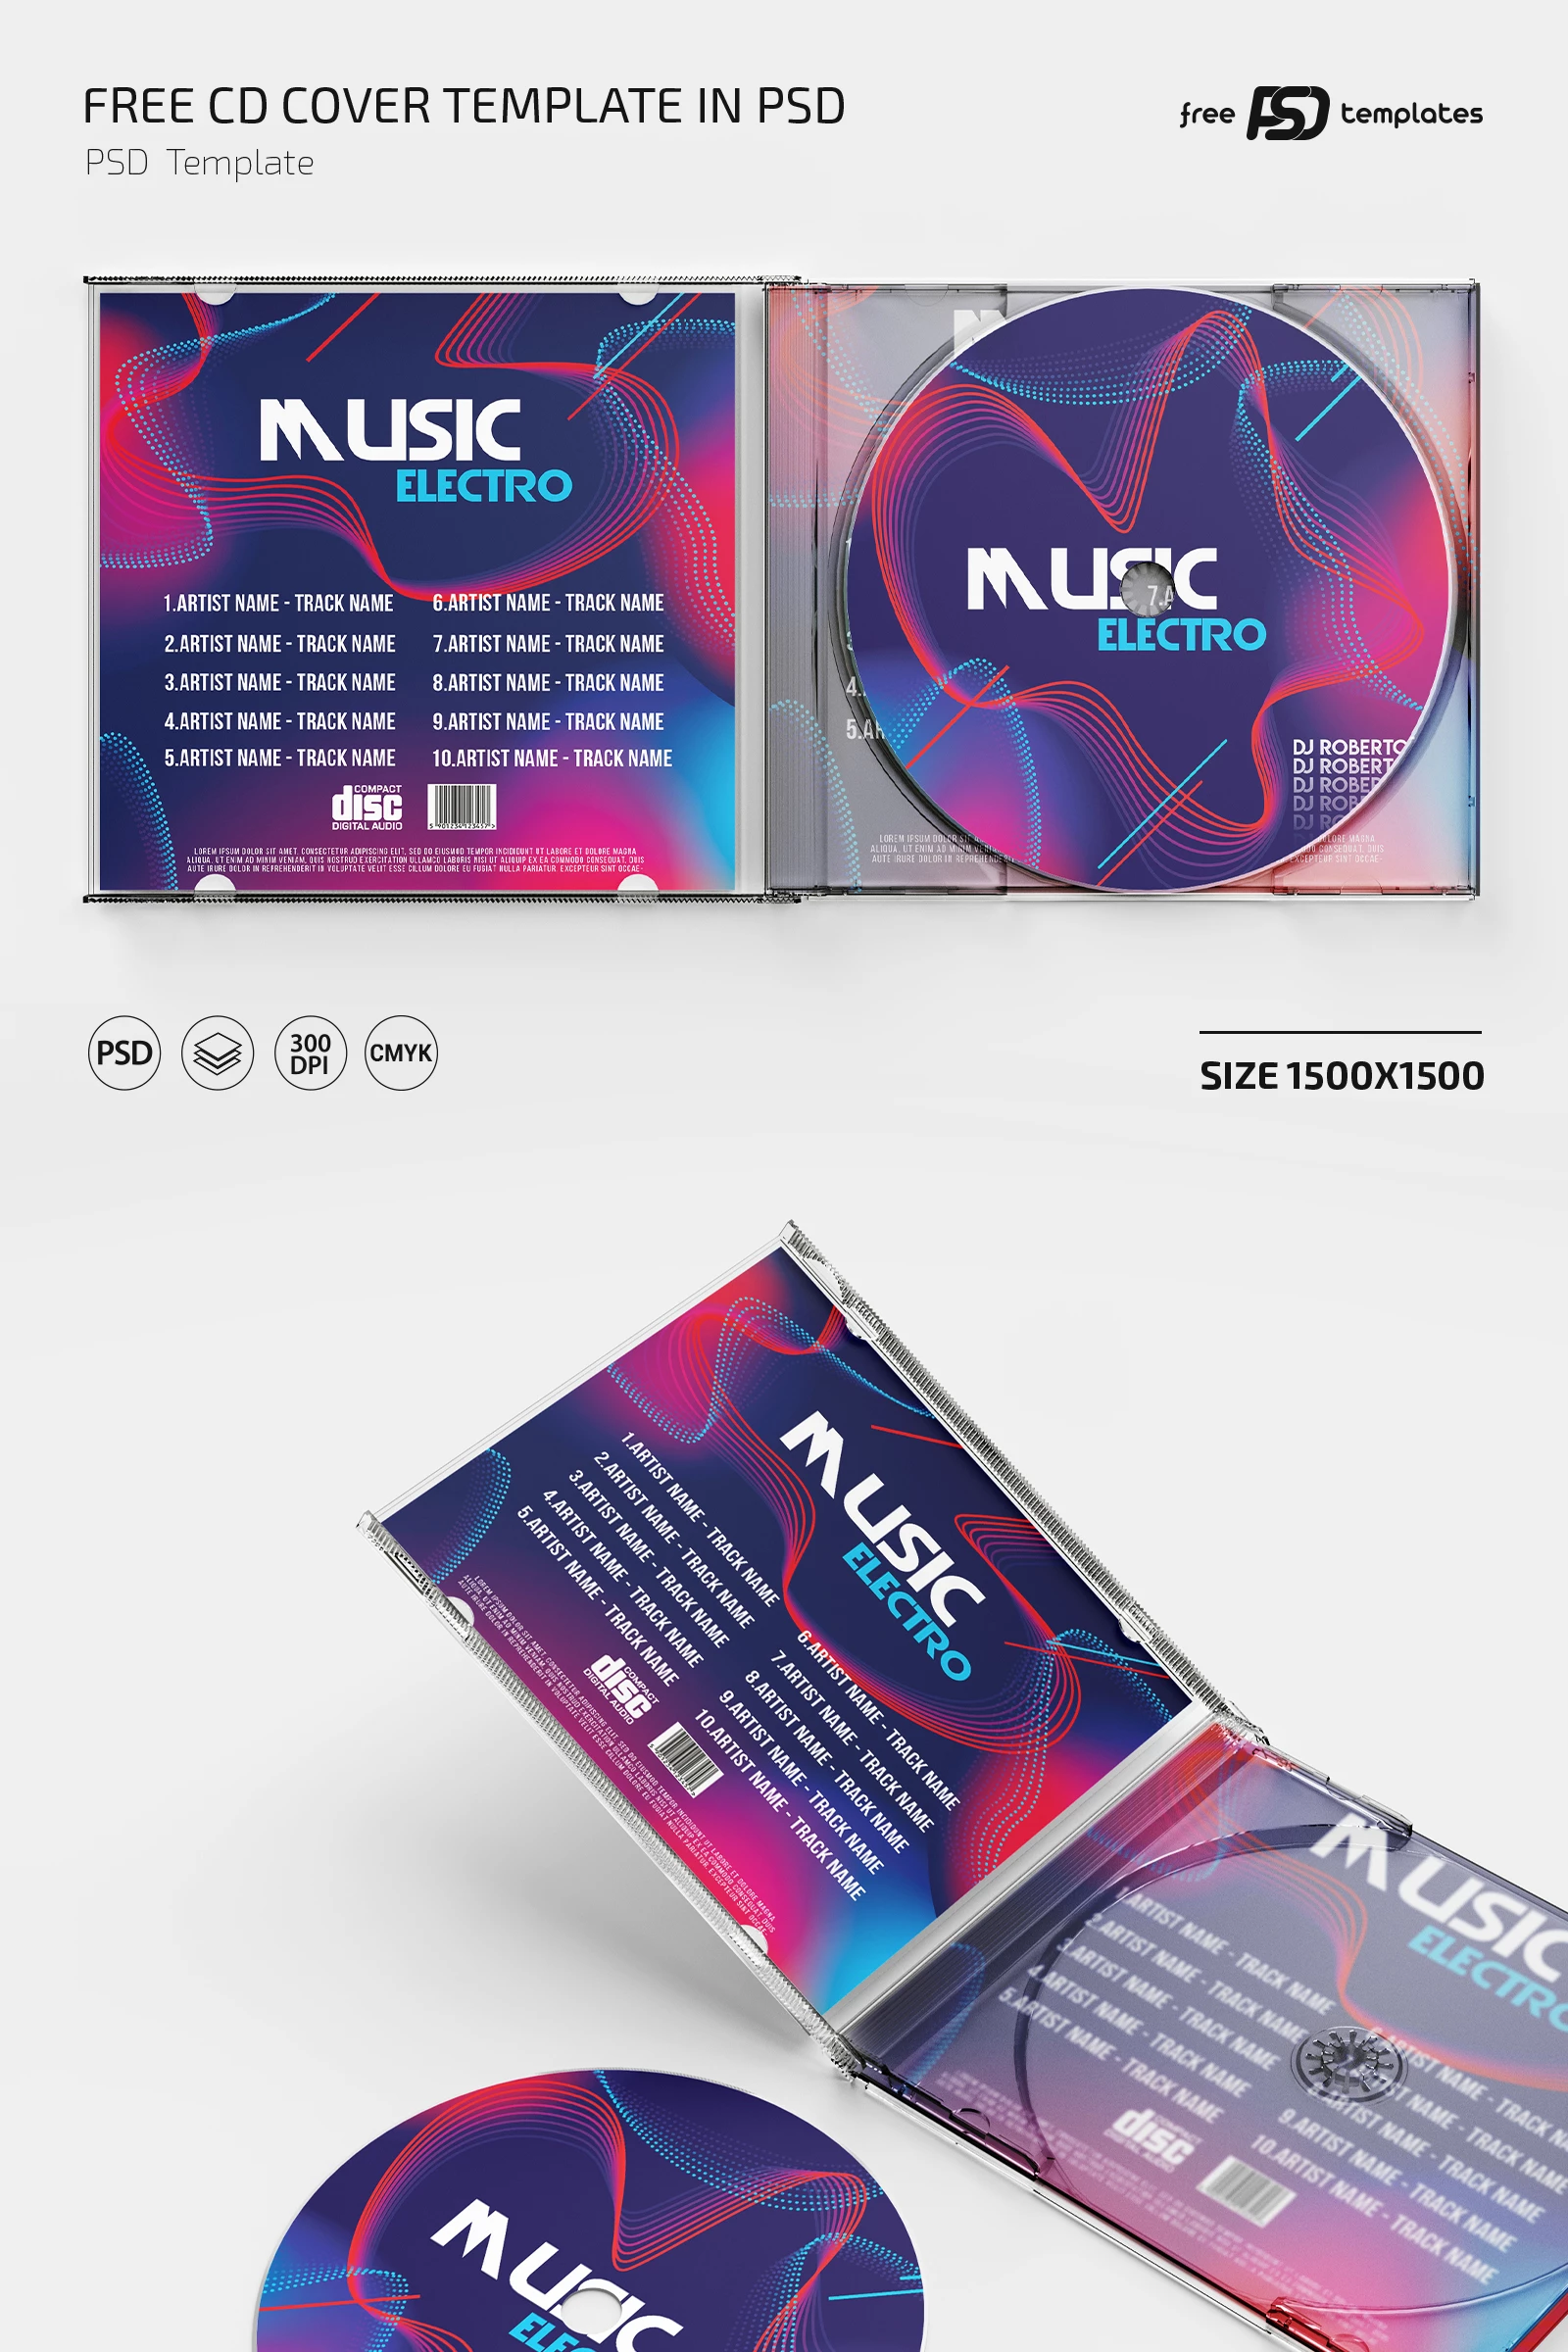 Free CD Cover Template in PSD